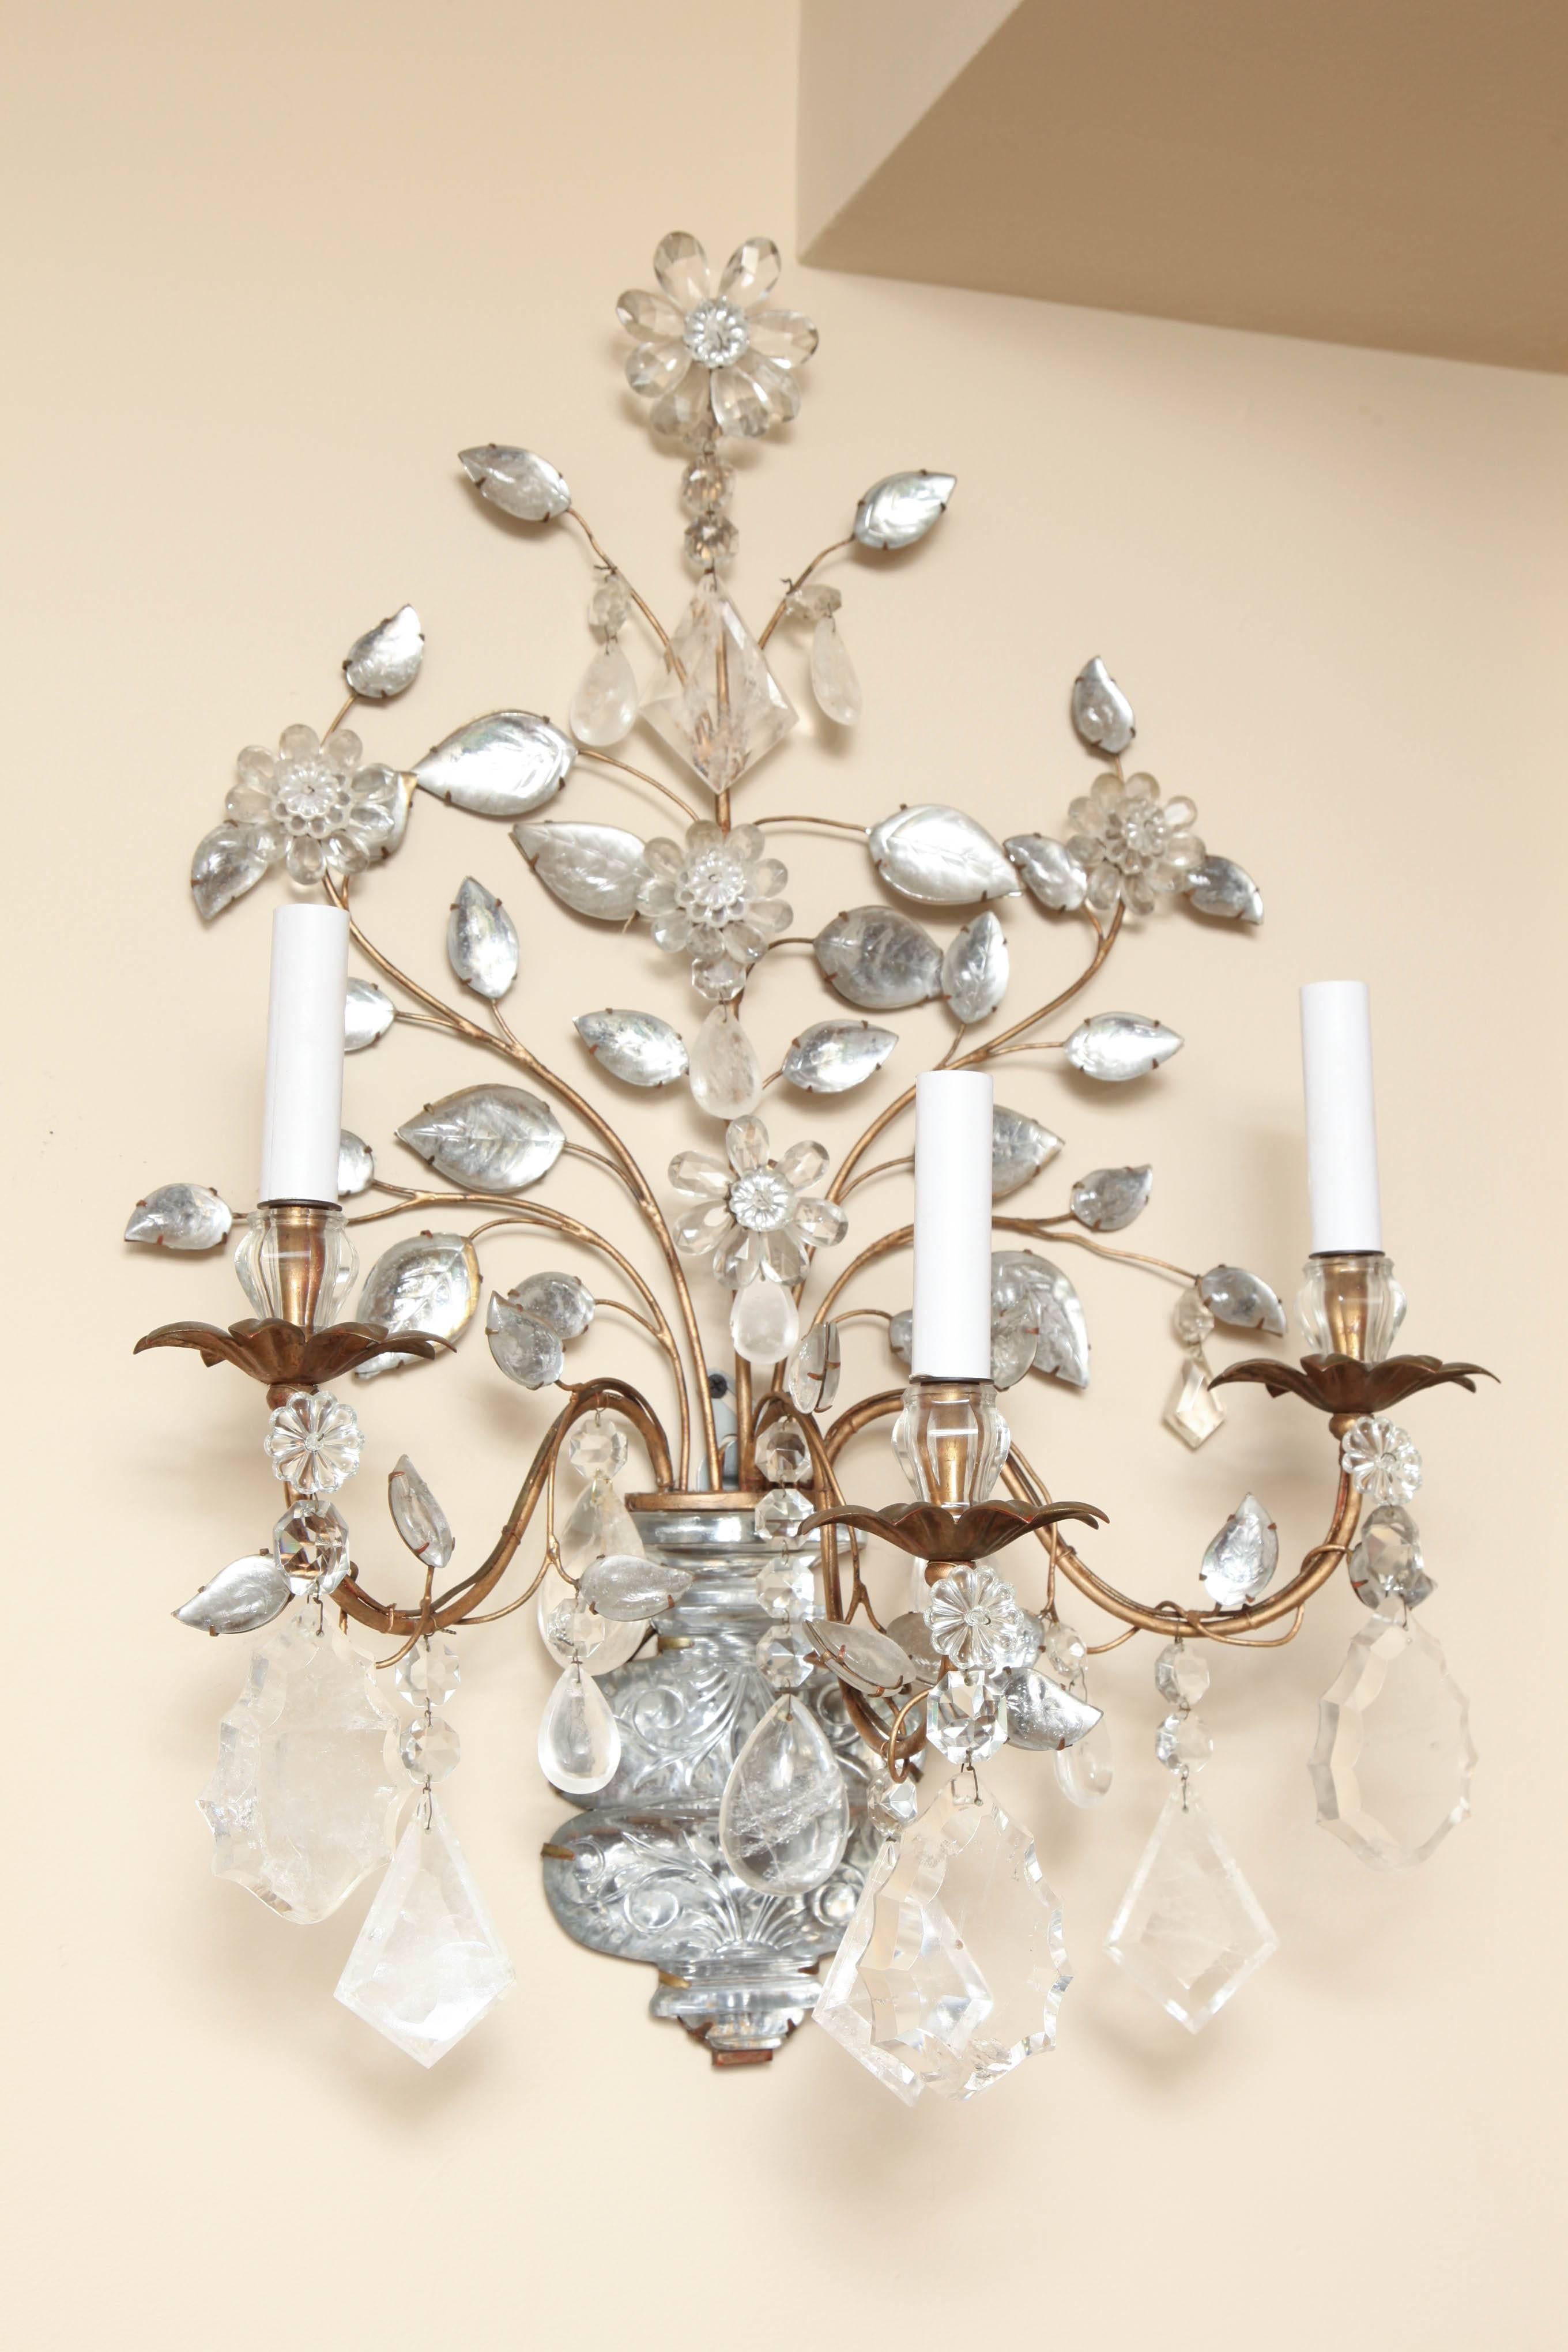 Pair of 3 Light French Bagues Louis XVI style wall sconces with carved glass vase shaped backplates issuing 3 branches with rock crystal, carved leaves, and flowers formed of beads. Each candle cup with leaf shaped metal bobeches. Circa 1950.